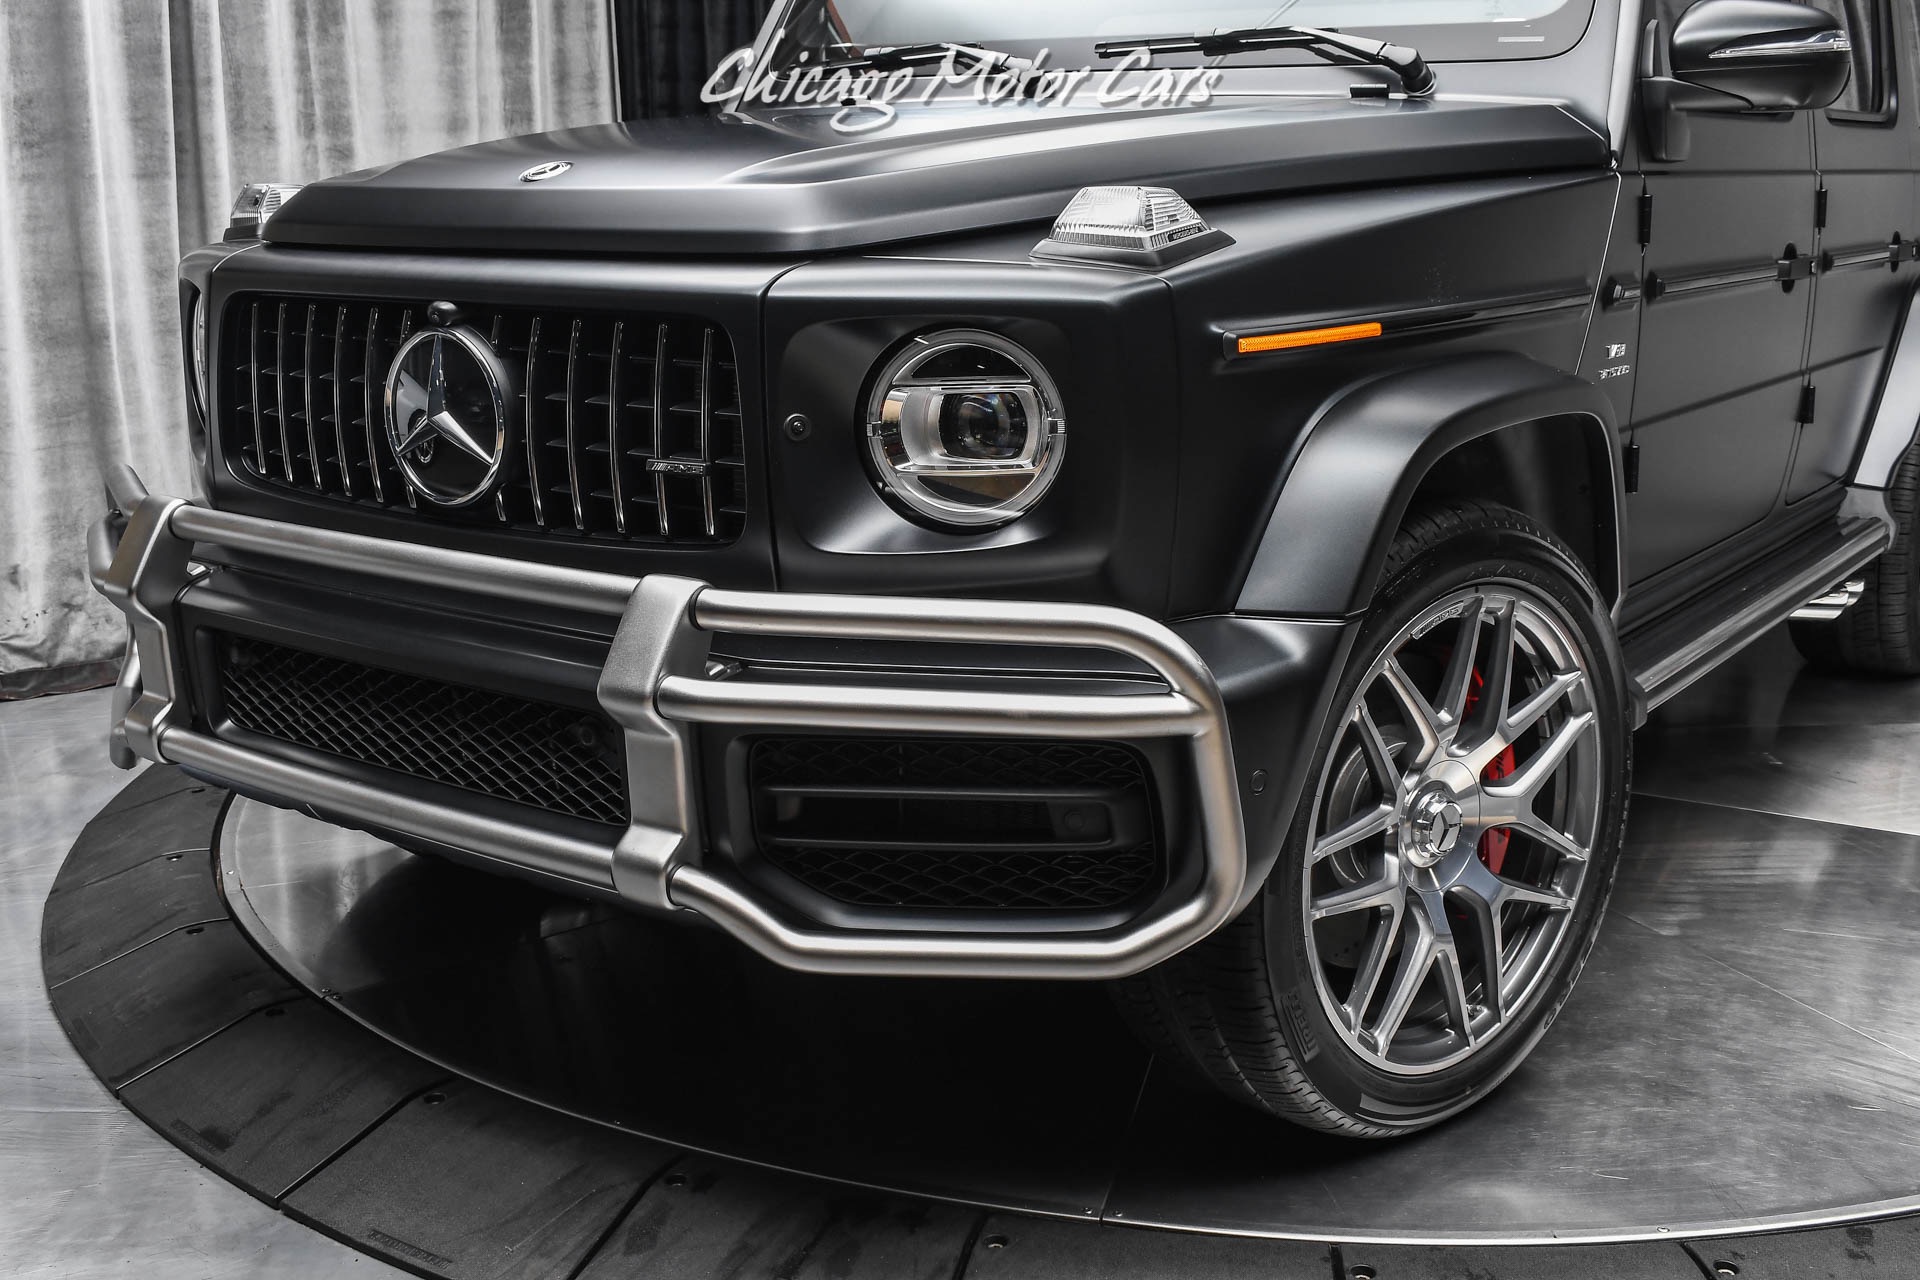 Used-2021-Mercedes-Benz-G63-AMG-G63-4MATIC-Exclusive-Interior-Package-Carbon-Fiber-Magno-Black